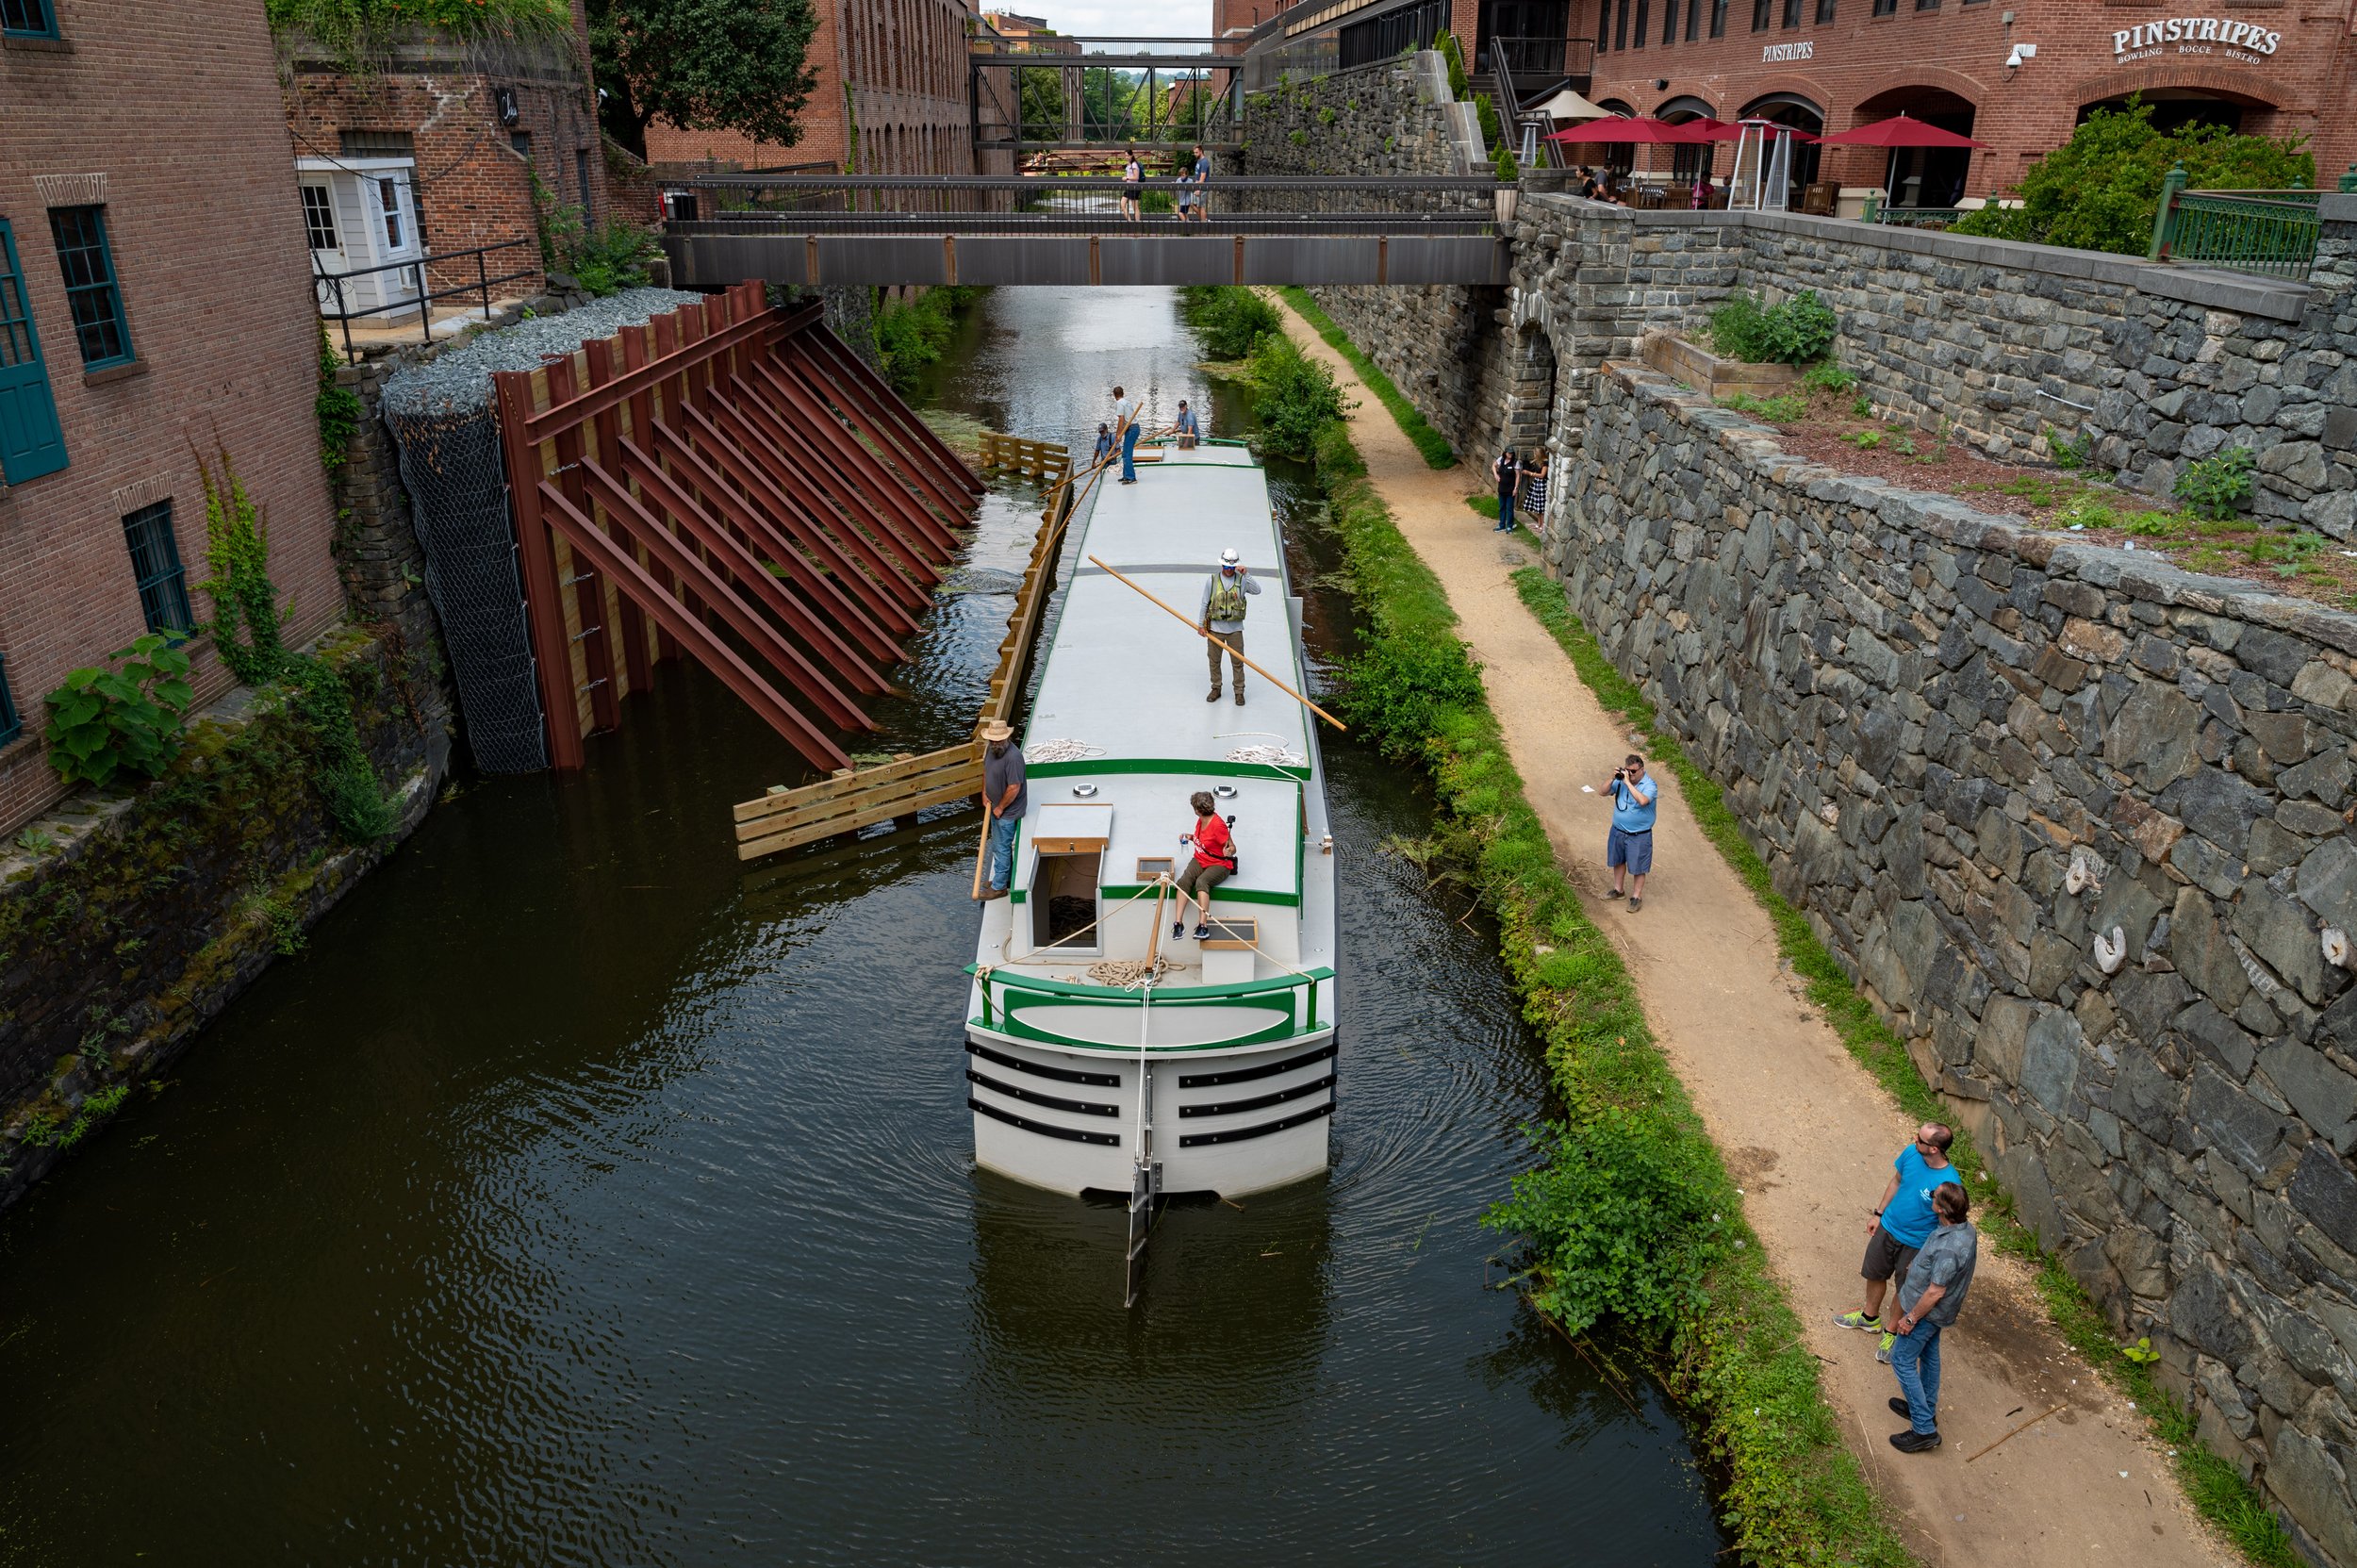 C&O Canal in Georgetown